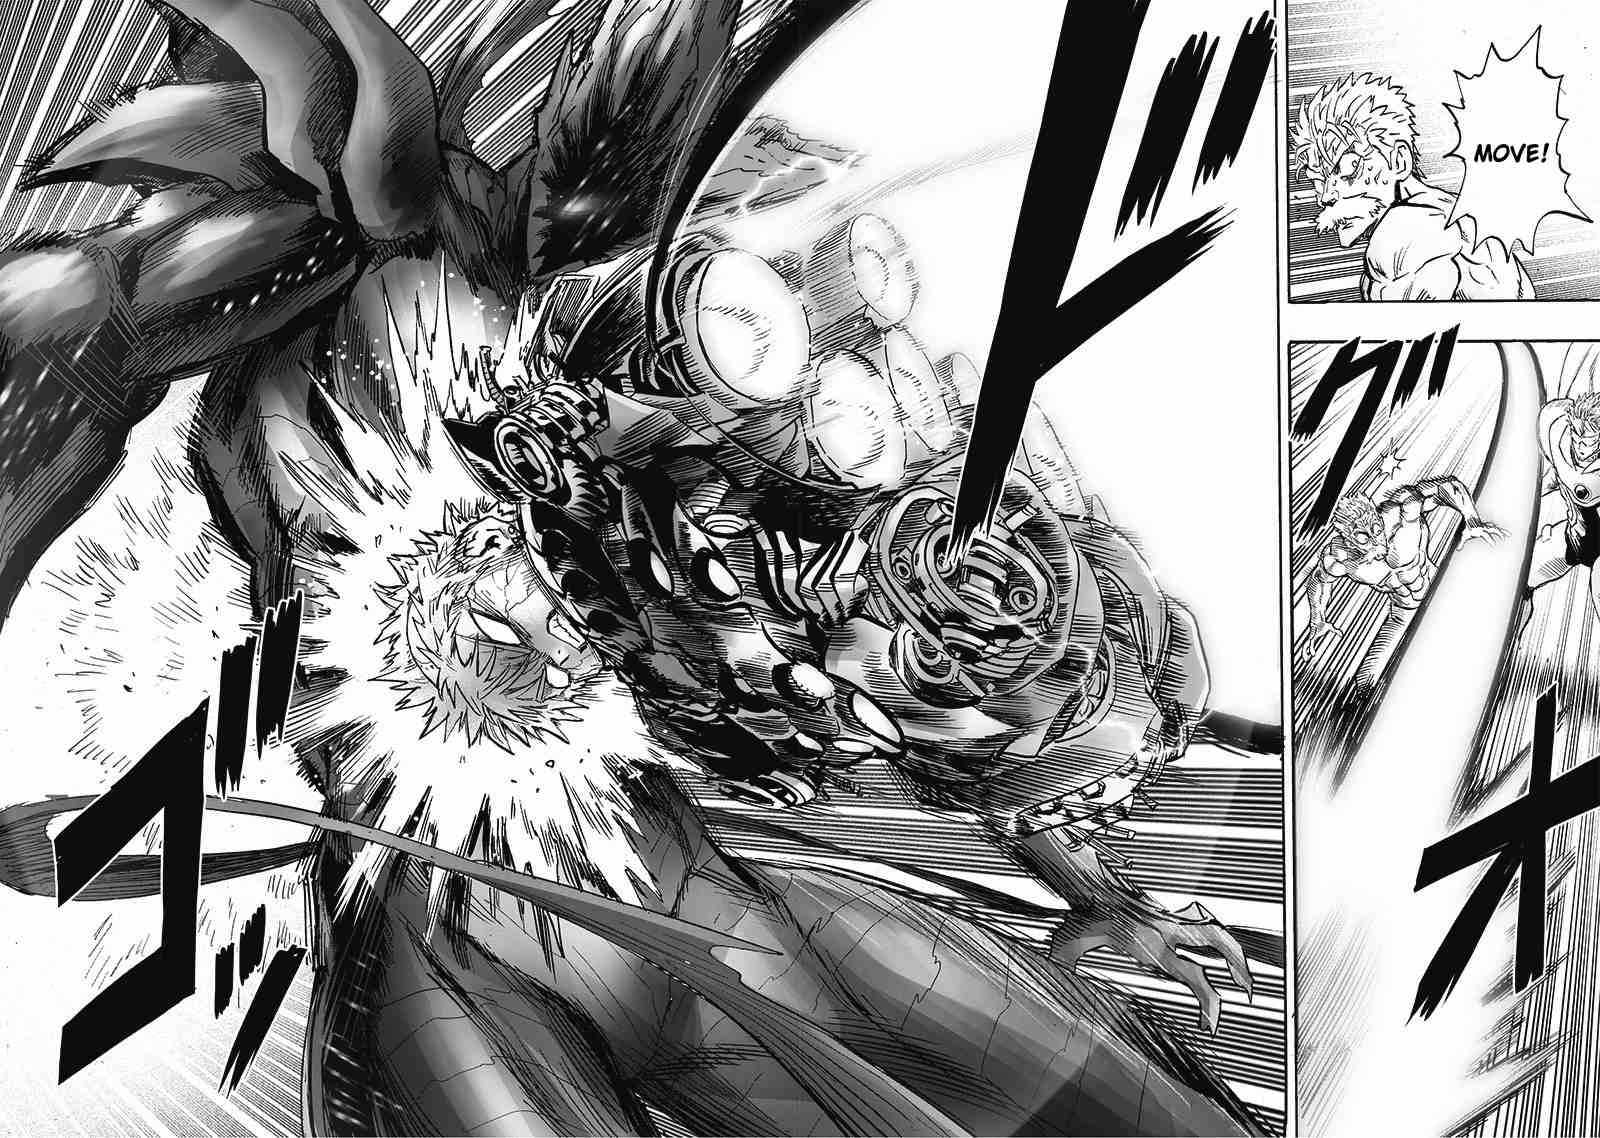 One Punch Man Chapter 166, READ One Punch Man Chapter 166 ONLINE, lost in the cloud genre,lost in the cloud gif,lost in the cloud girl,lost in the cloud goods,lost in the cloud goodreads,lost in the cloud,lost ark cloud gaming,lost odyssey cloud gaming,lost in the cloud fanart,lost in the cloud fanfic,lost in the cloud fandom,lost in the cloud first kiss,lost in the cloud font,lost in the cloud ending,lost in the cloud episode 97,lost in the cloud edit,lost in the cloud explained,lost in the cloud dog,lost in the cloud discord server,lost in the cloud desktop wallpaper,lost in the cloud drawing,can't find my cloud on network,lost in the cloud characters,lost in the cloud chapter 93 release date,lost in the cloud birthday,lost in the cloud birthday art,lost in the cloud background,lost in the cloud banner,lost in the clouds meaning,what is the black cloud in lost,lost in the cloud ao3,lost in the cloud anime,lost in the cloud art,lost in the cloud author twitter,lost in the cloud author instagram,lost in the cloud artist,lost in the cloud acrylic stand,lost in the cloud artist twitter,lost in the cloud art style,lost in the cloud analysis